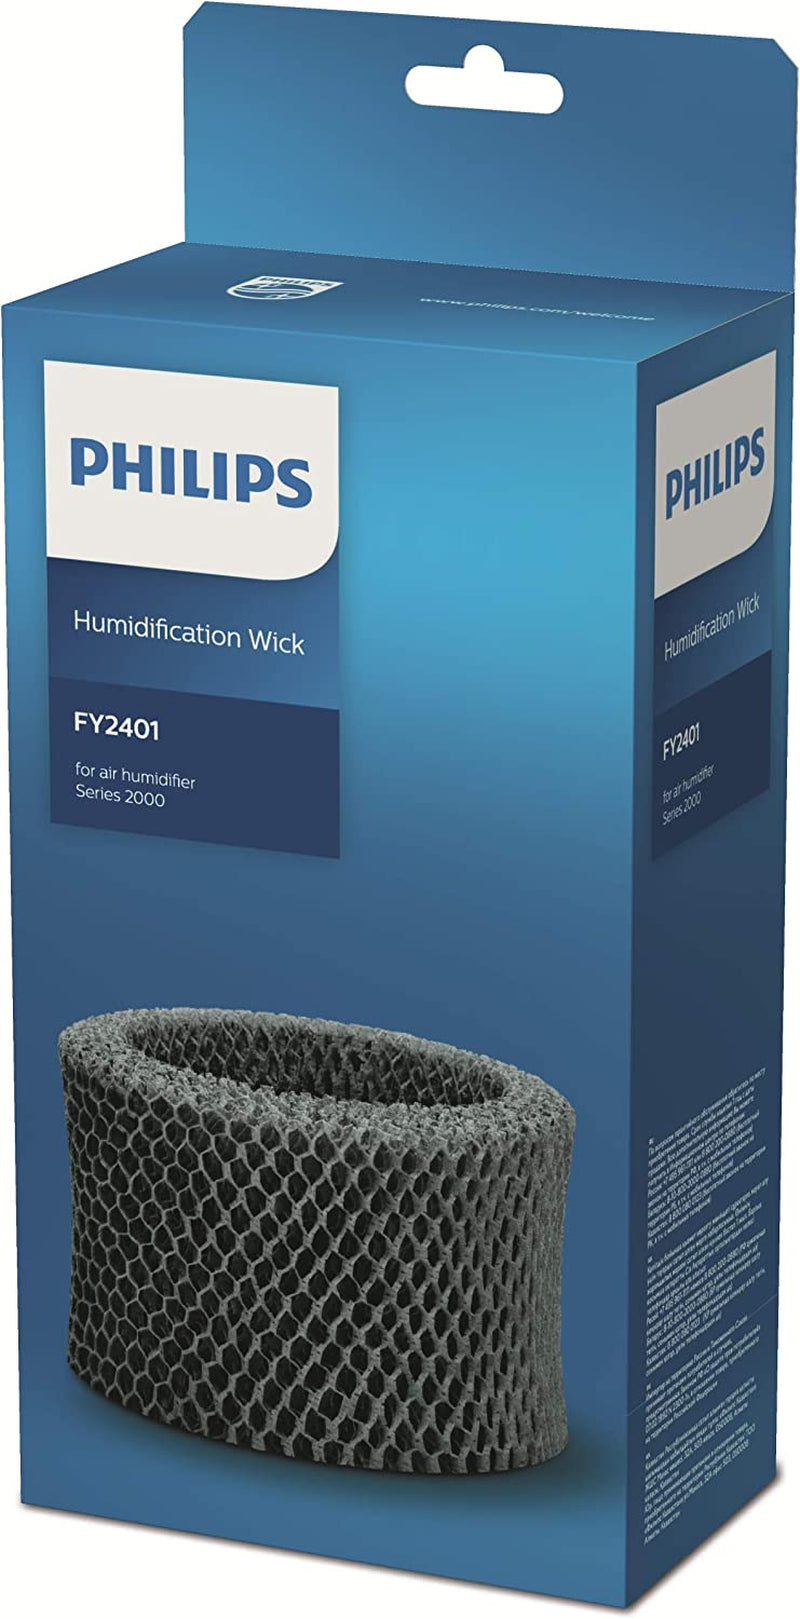 FY2401/30 Humidifier Wick Filter - for  Air Humidifier HU4803/70